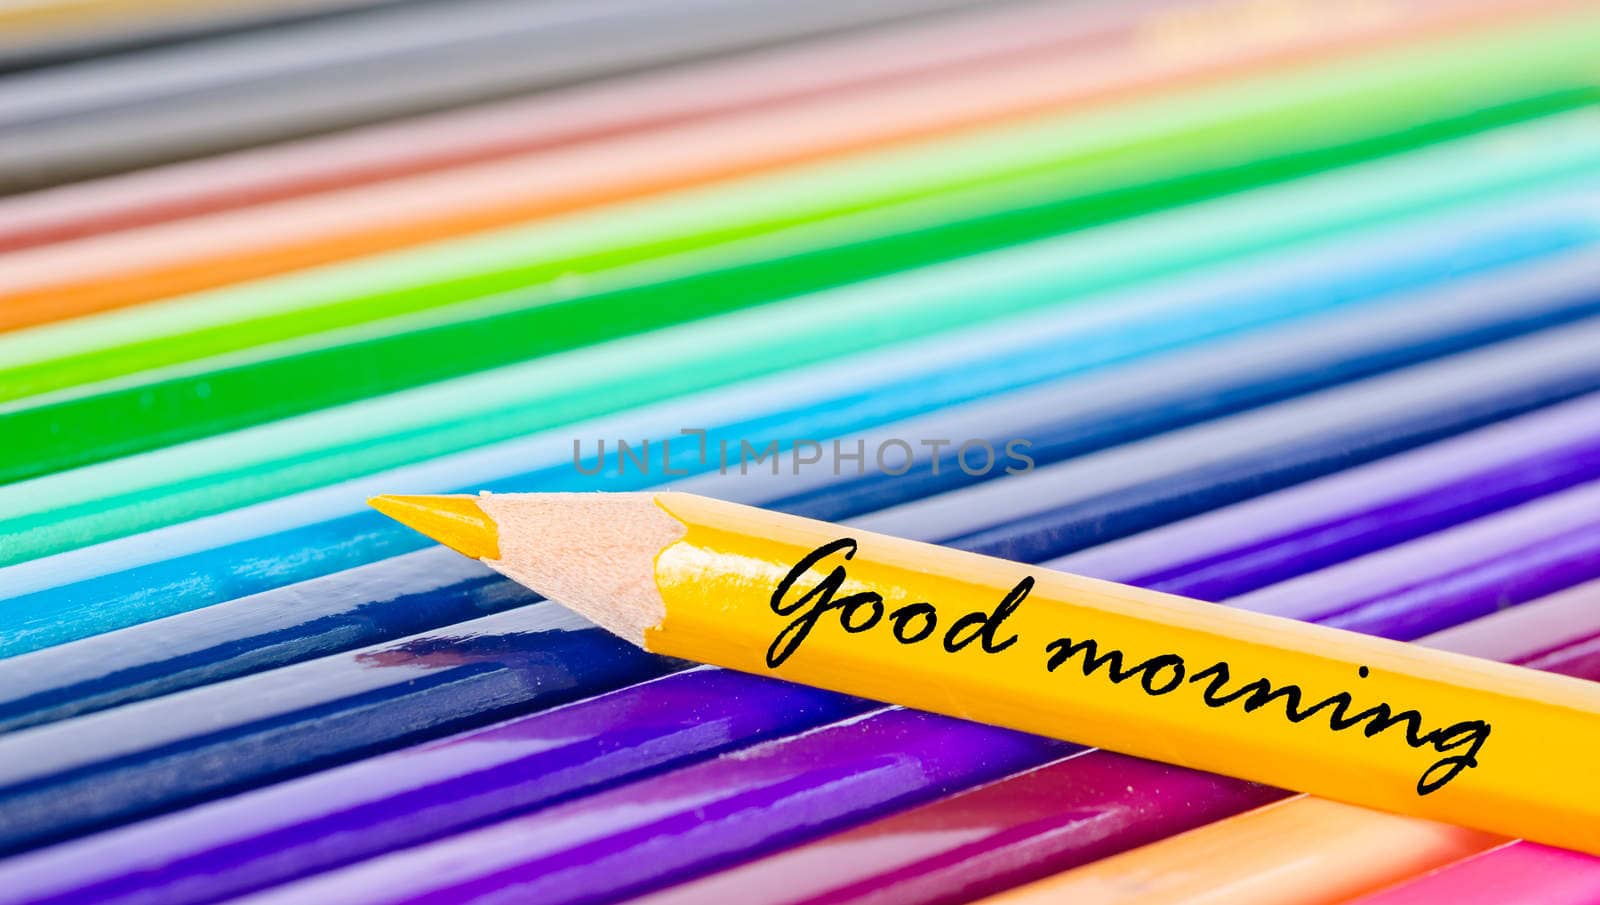 Good morning wording with yellow pencil on many color pencils background.